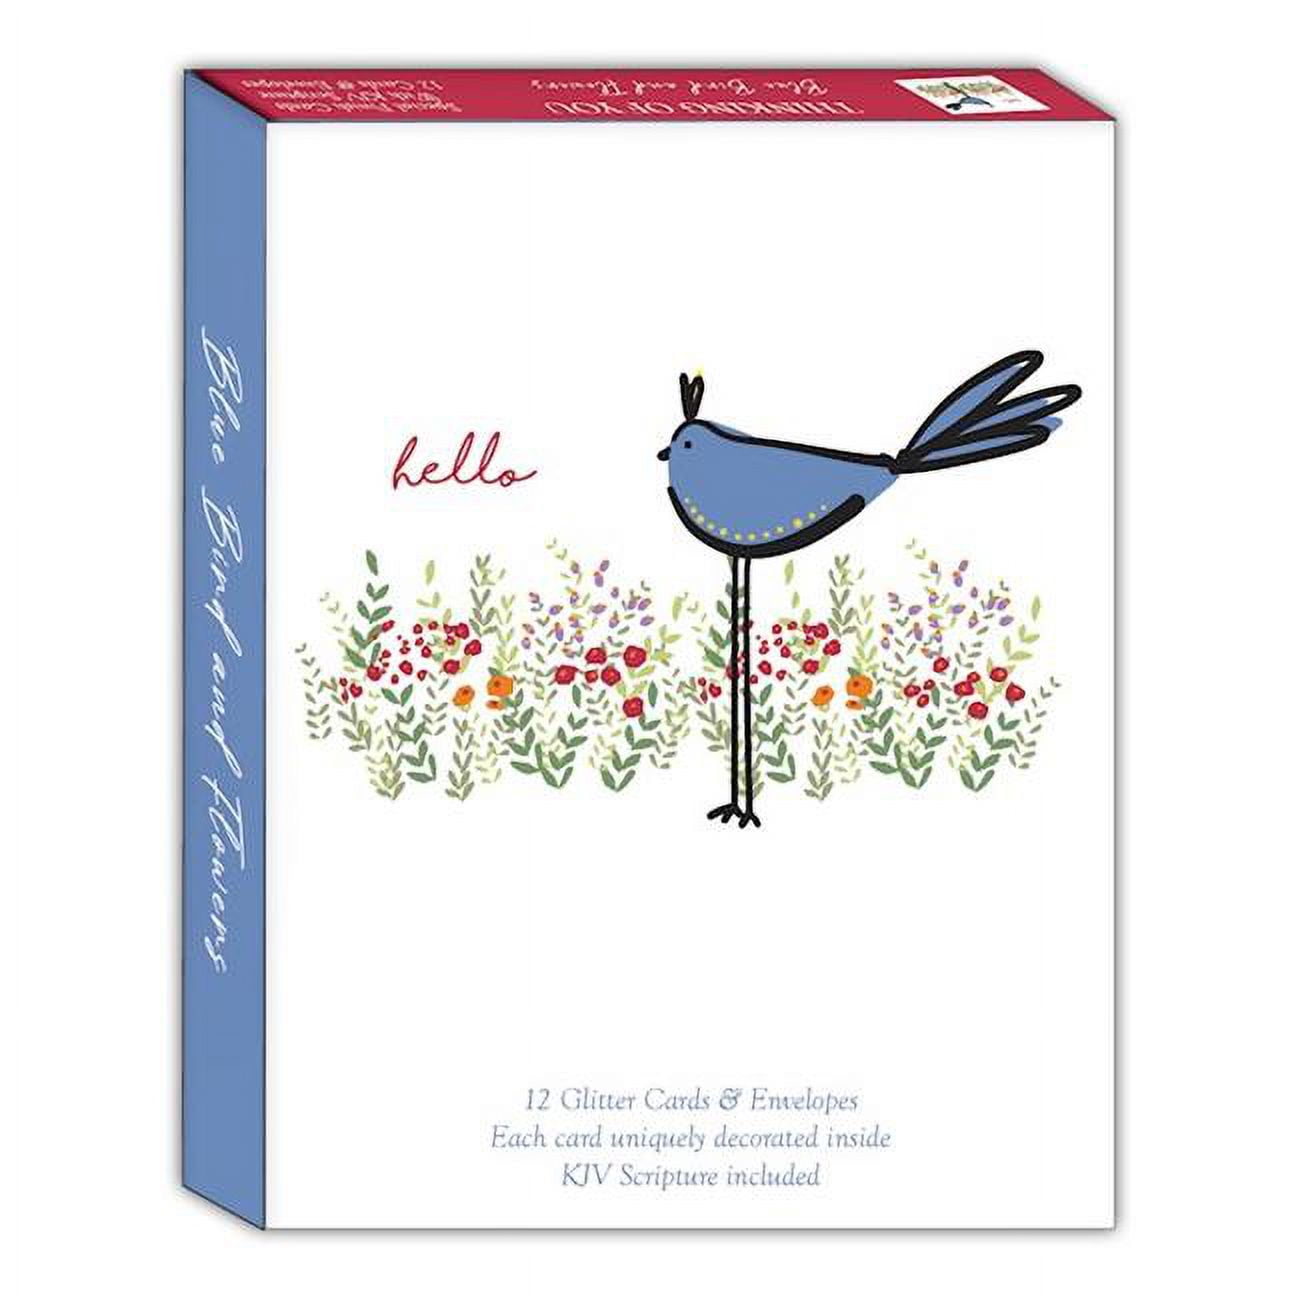 Picture of Crown Point Graphics 309274 Blue Bird & Flowers Thinking of You Shared Blessings Boxed Card